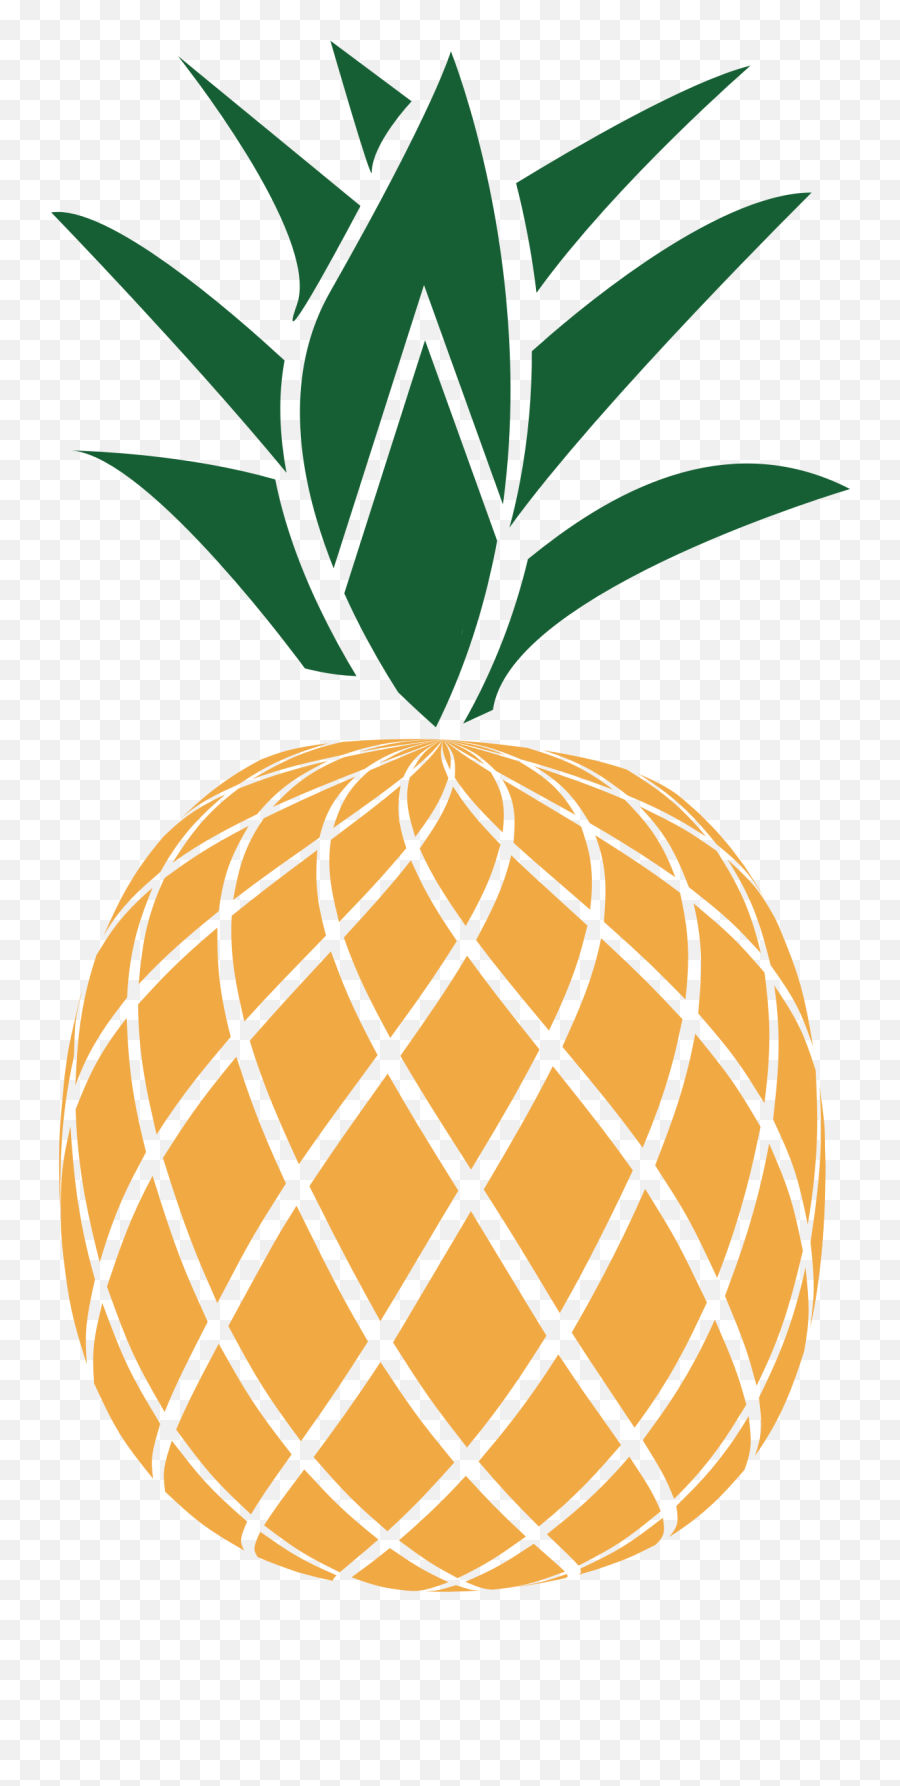 Pineapple Clipart Png Image With No - Pineapple Clip Art Emoji,Pineapple Clipart